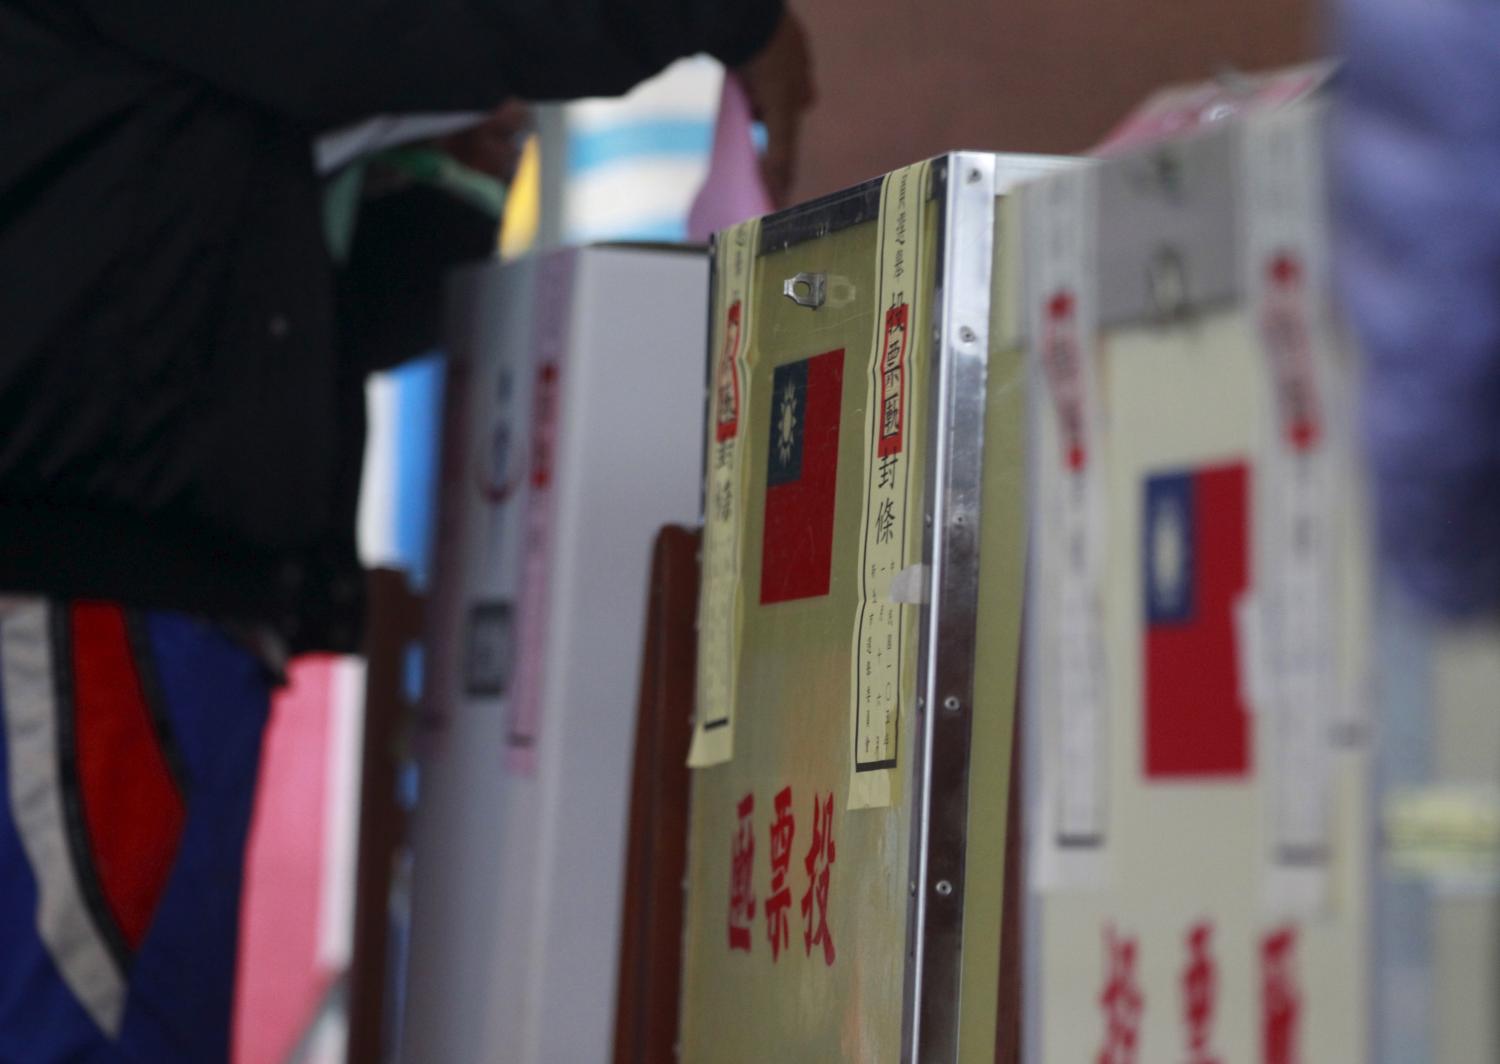 A voter casts his ballot at a polling station during general elections in New Taipei City, Taiwan January 16, 2016.  REUTERS/Pichi Chuang - GF20000096424